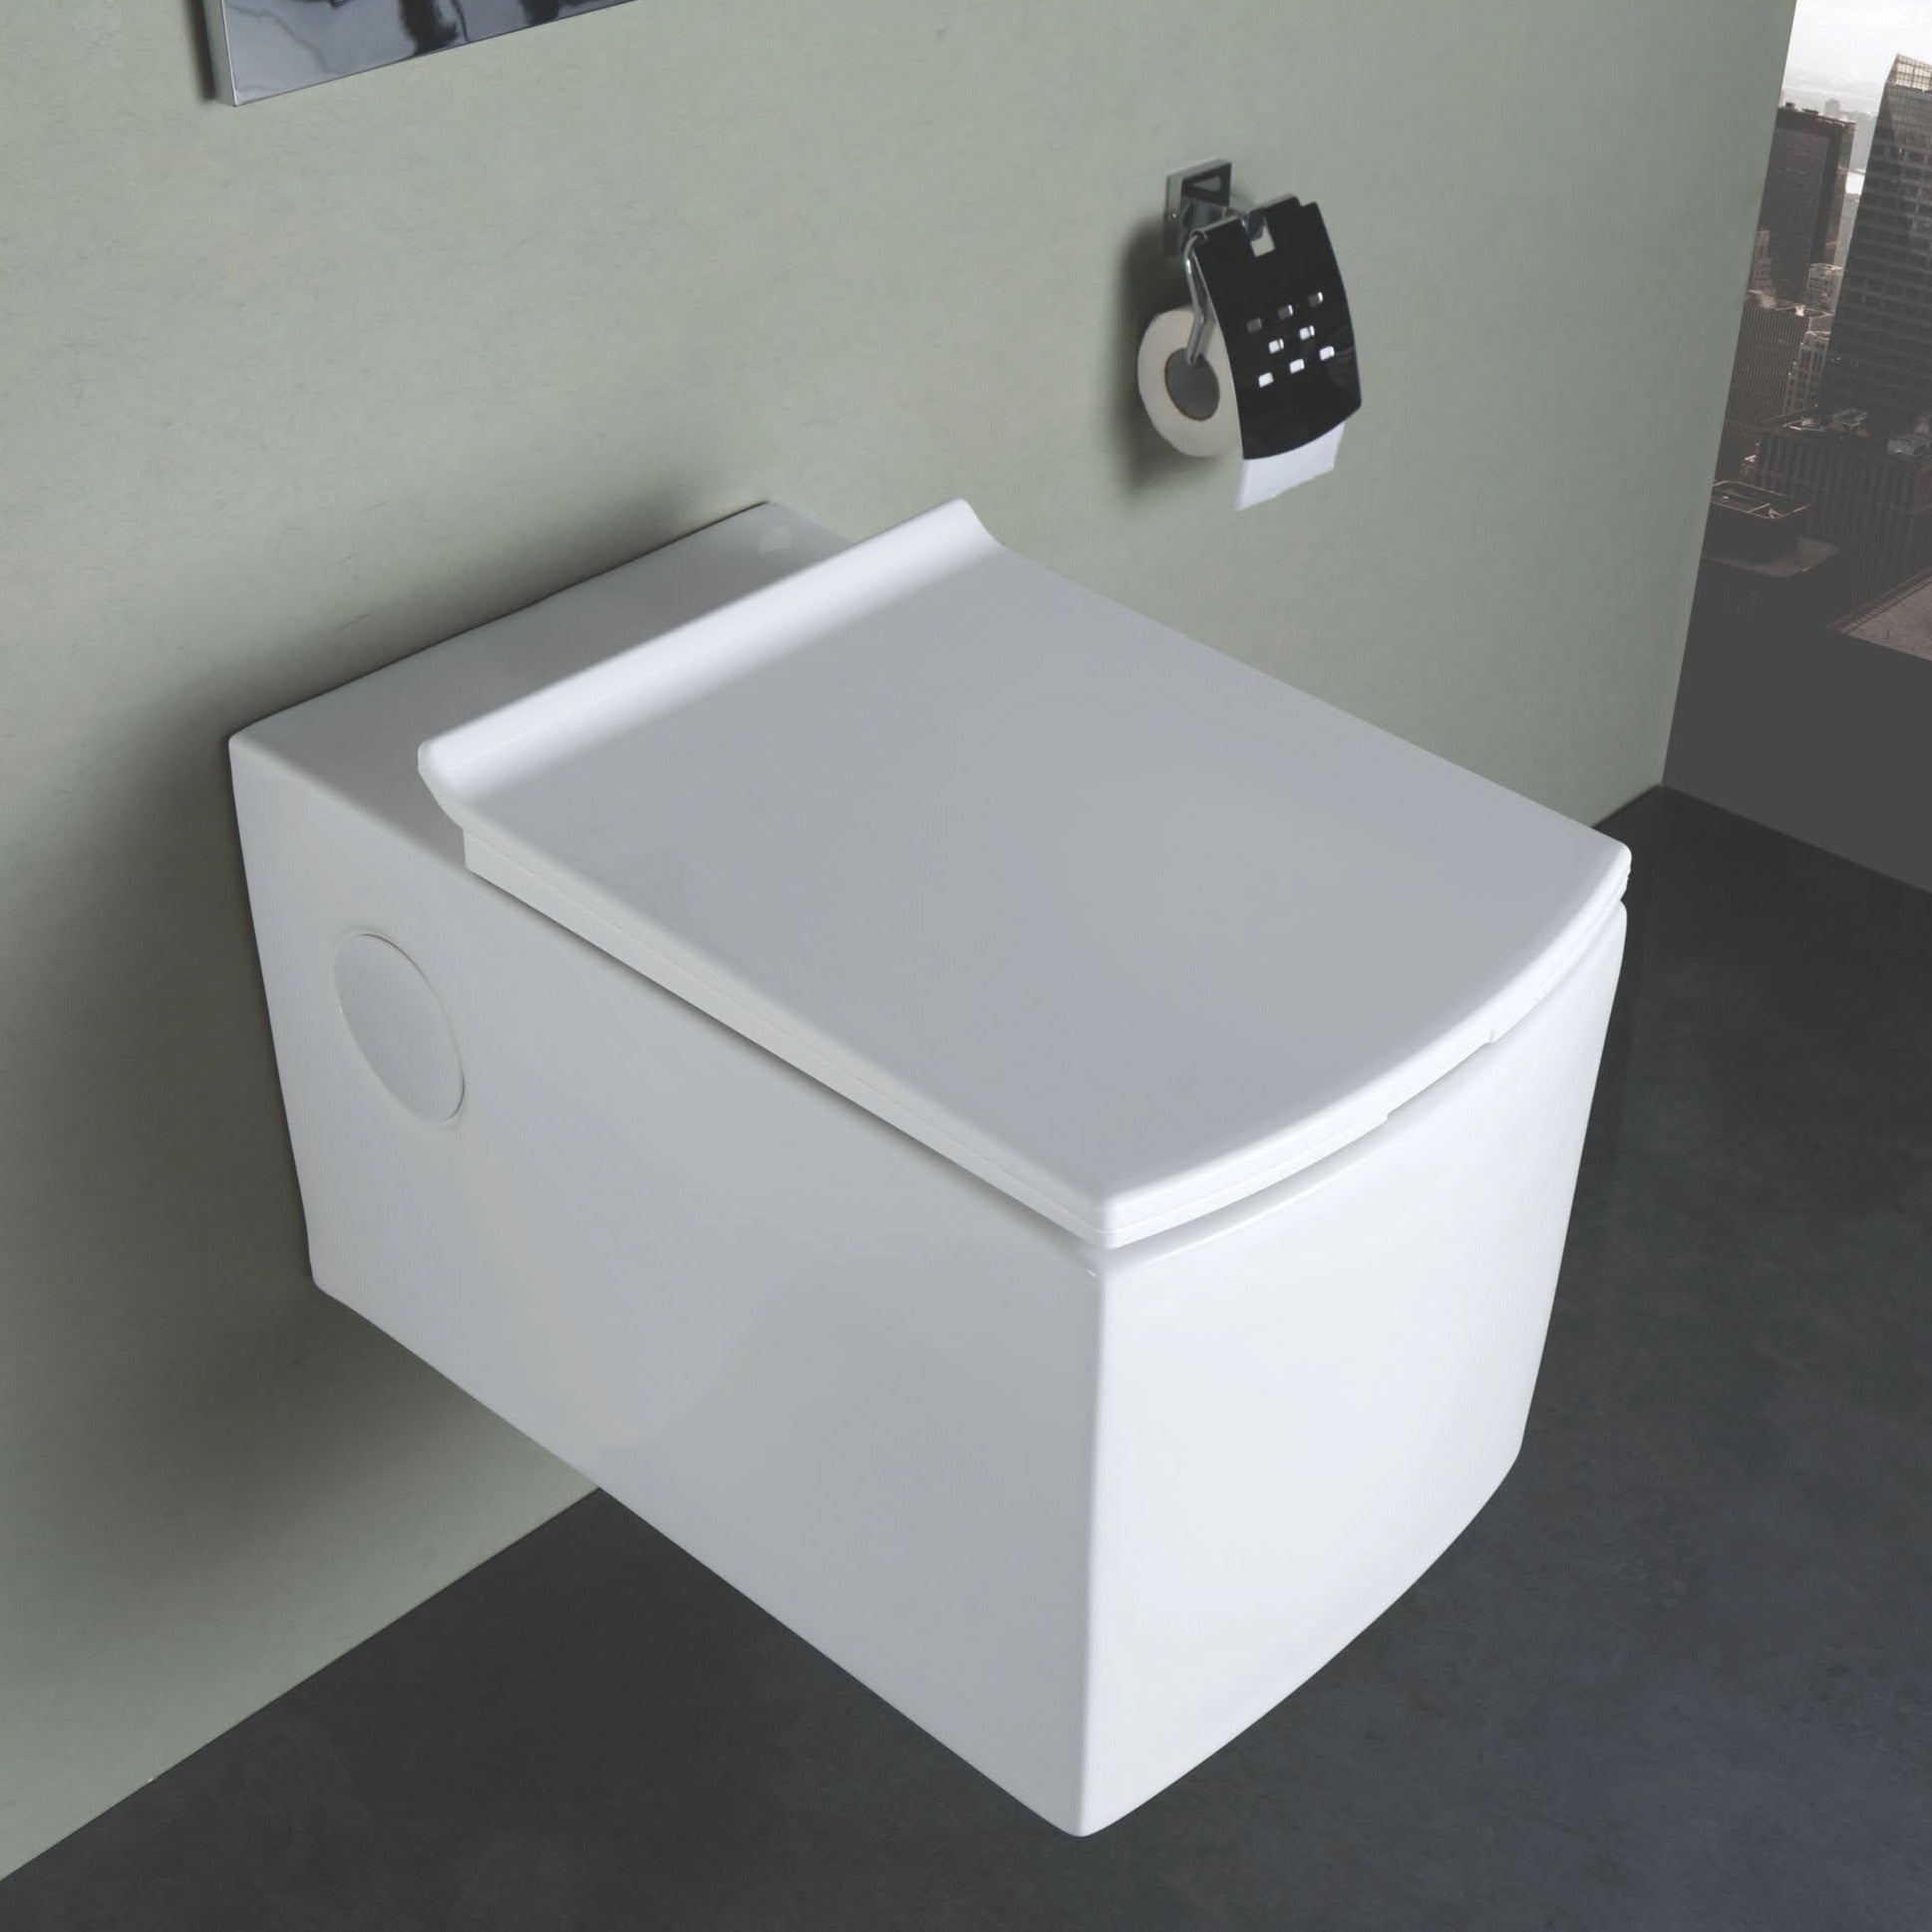 Ceramic Wall Hung Wc with soft close seat cover-jaquar wall hung